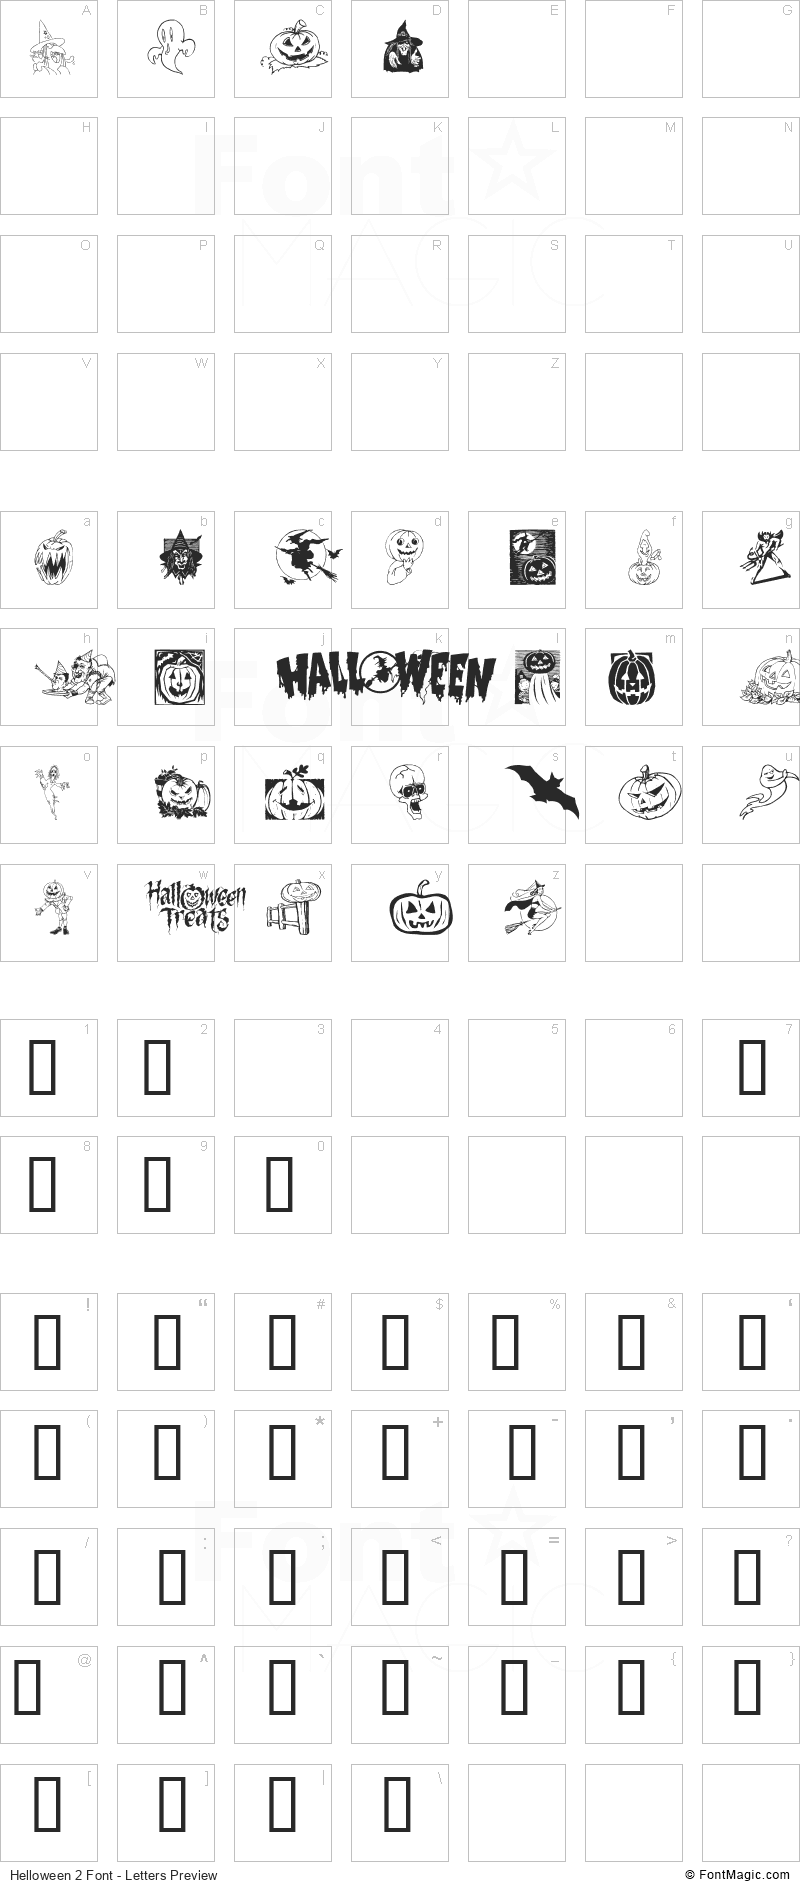 Helloween 2 Font - All Latters Preview Chart